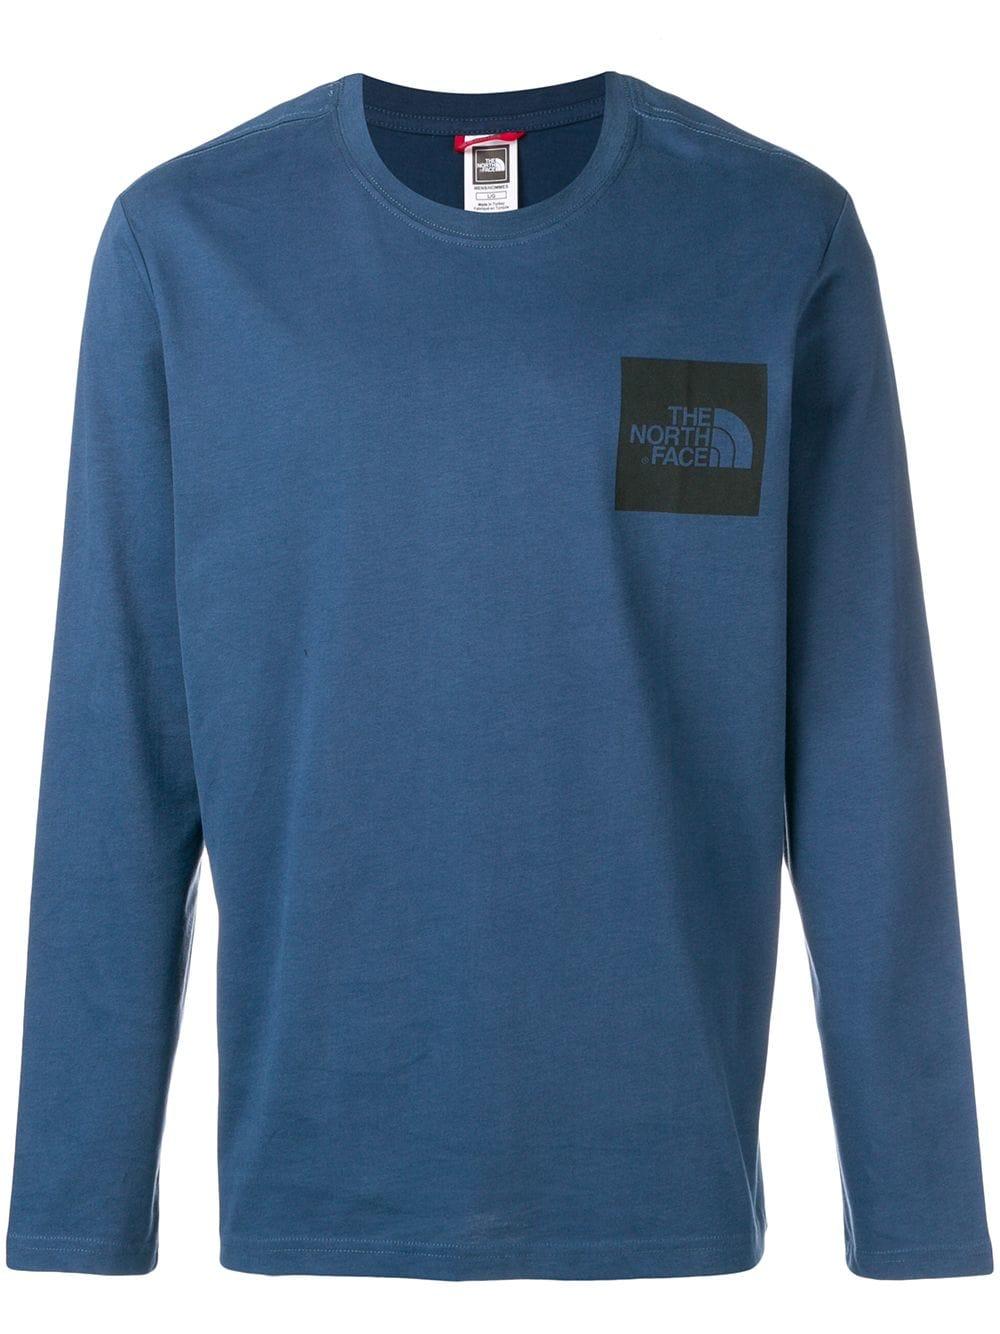 Round Face with Blue Logo - The North Face Logo Sweatshirt In Blue | ModeSens